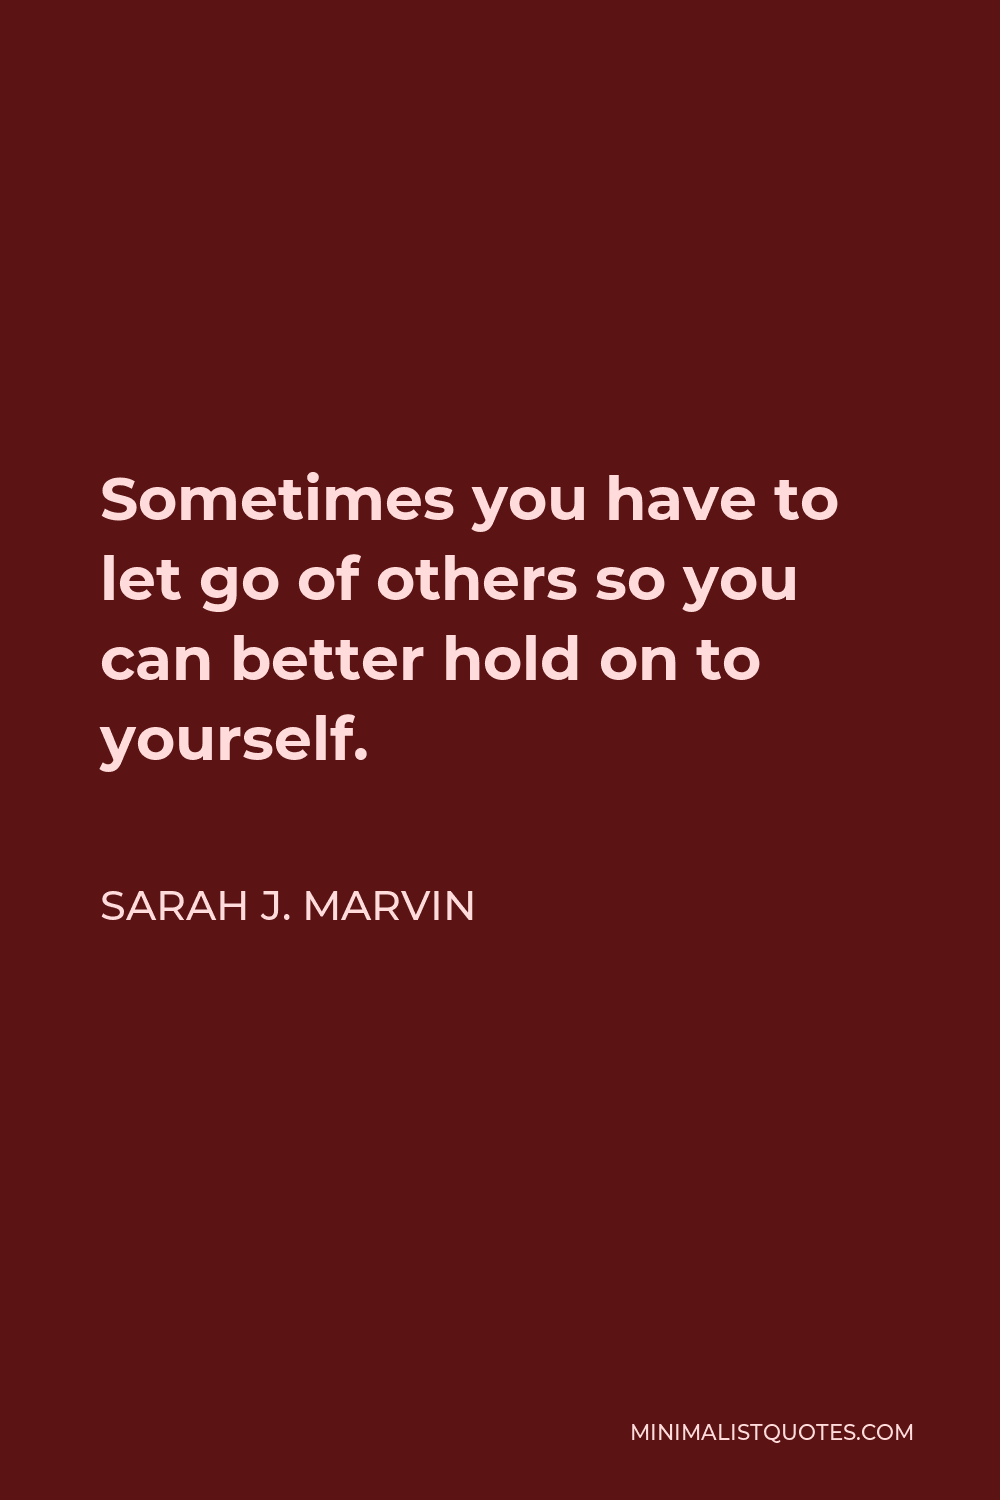 Sarah J. Marvin Quote - Sometimes you have to let go of others so you can better hold on to yourself.